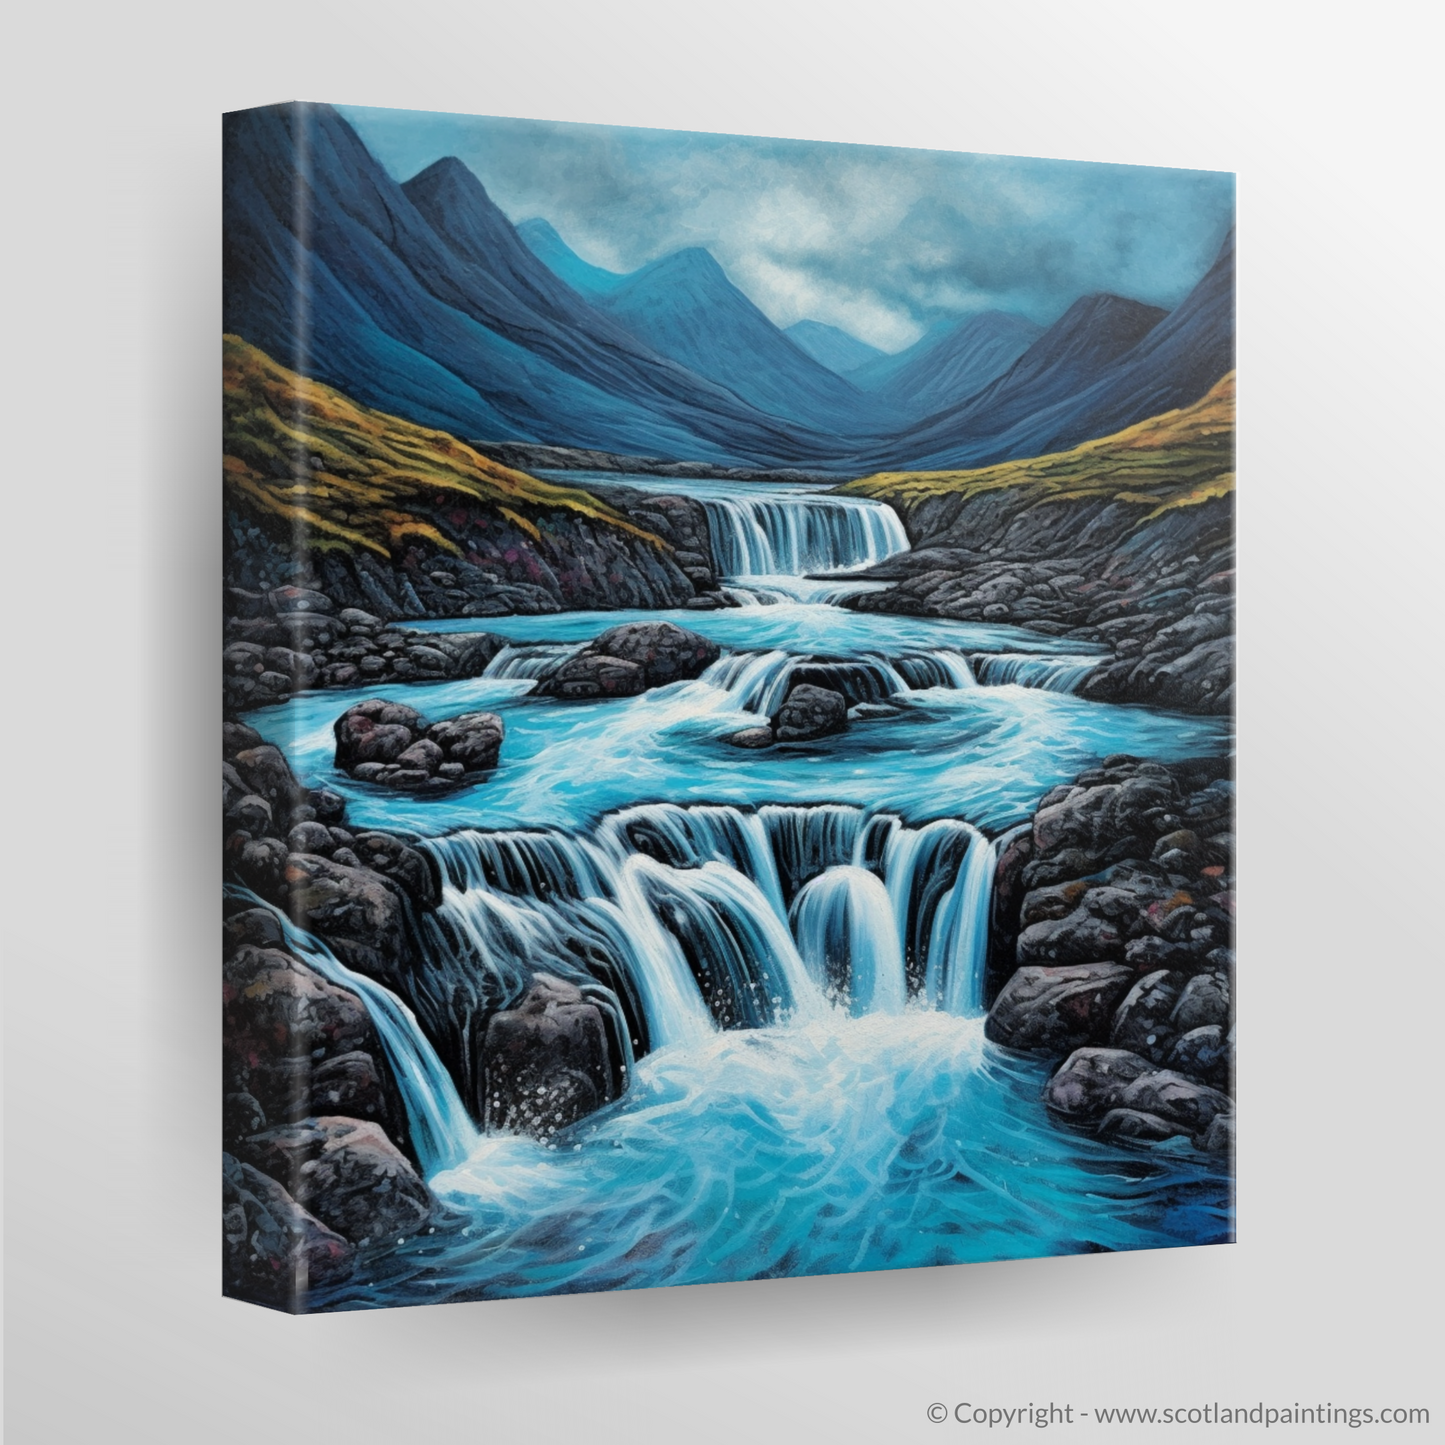 Enchanted Waters and Brooding Skies: A Naive Art Tribute to Isle of Skye Fairy Pools